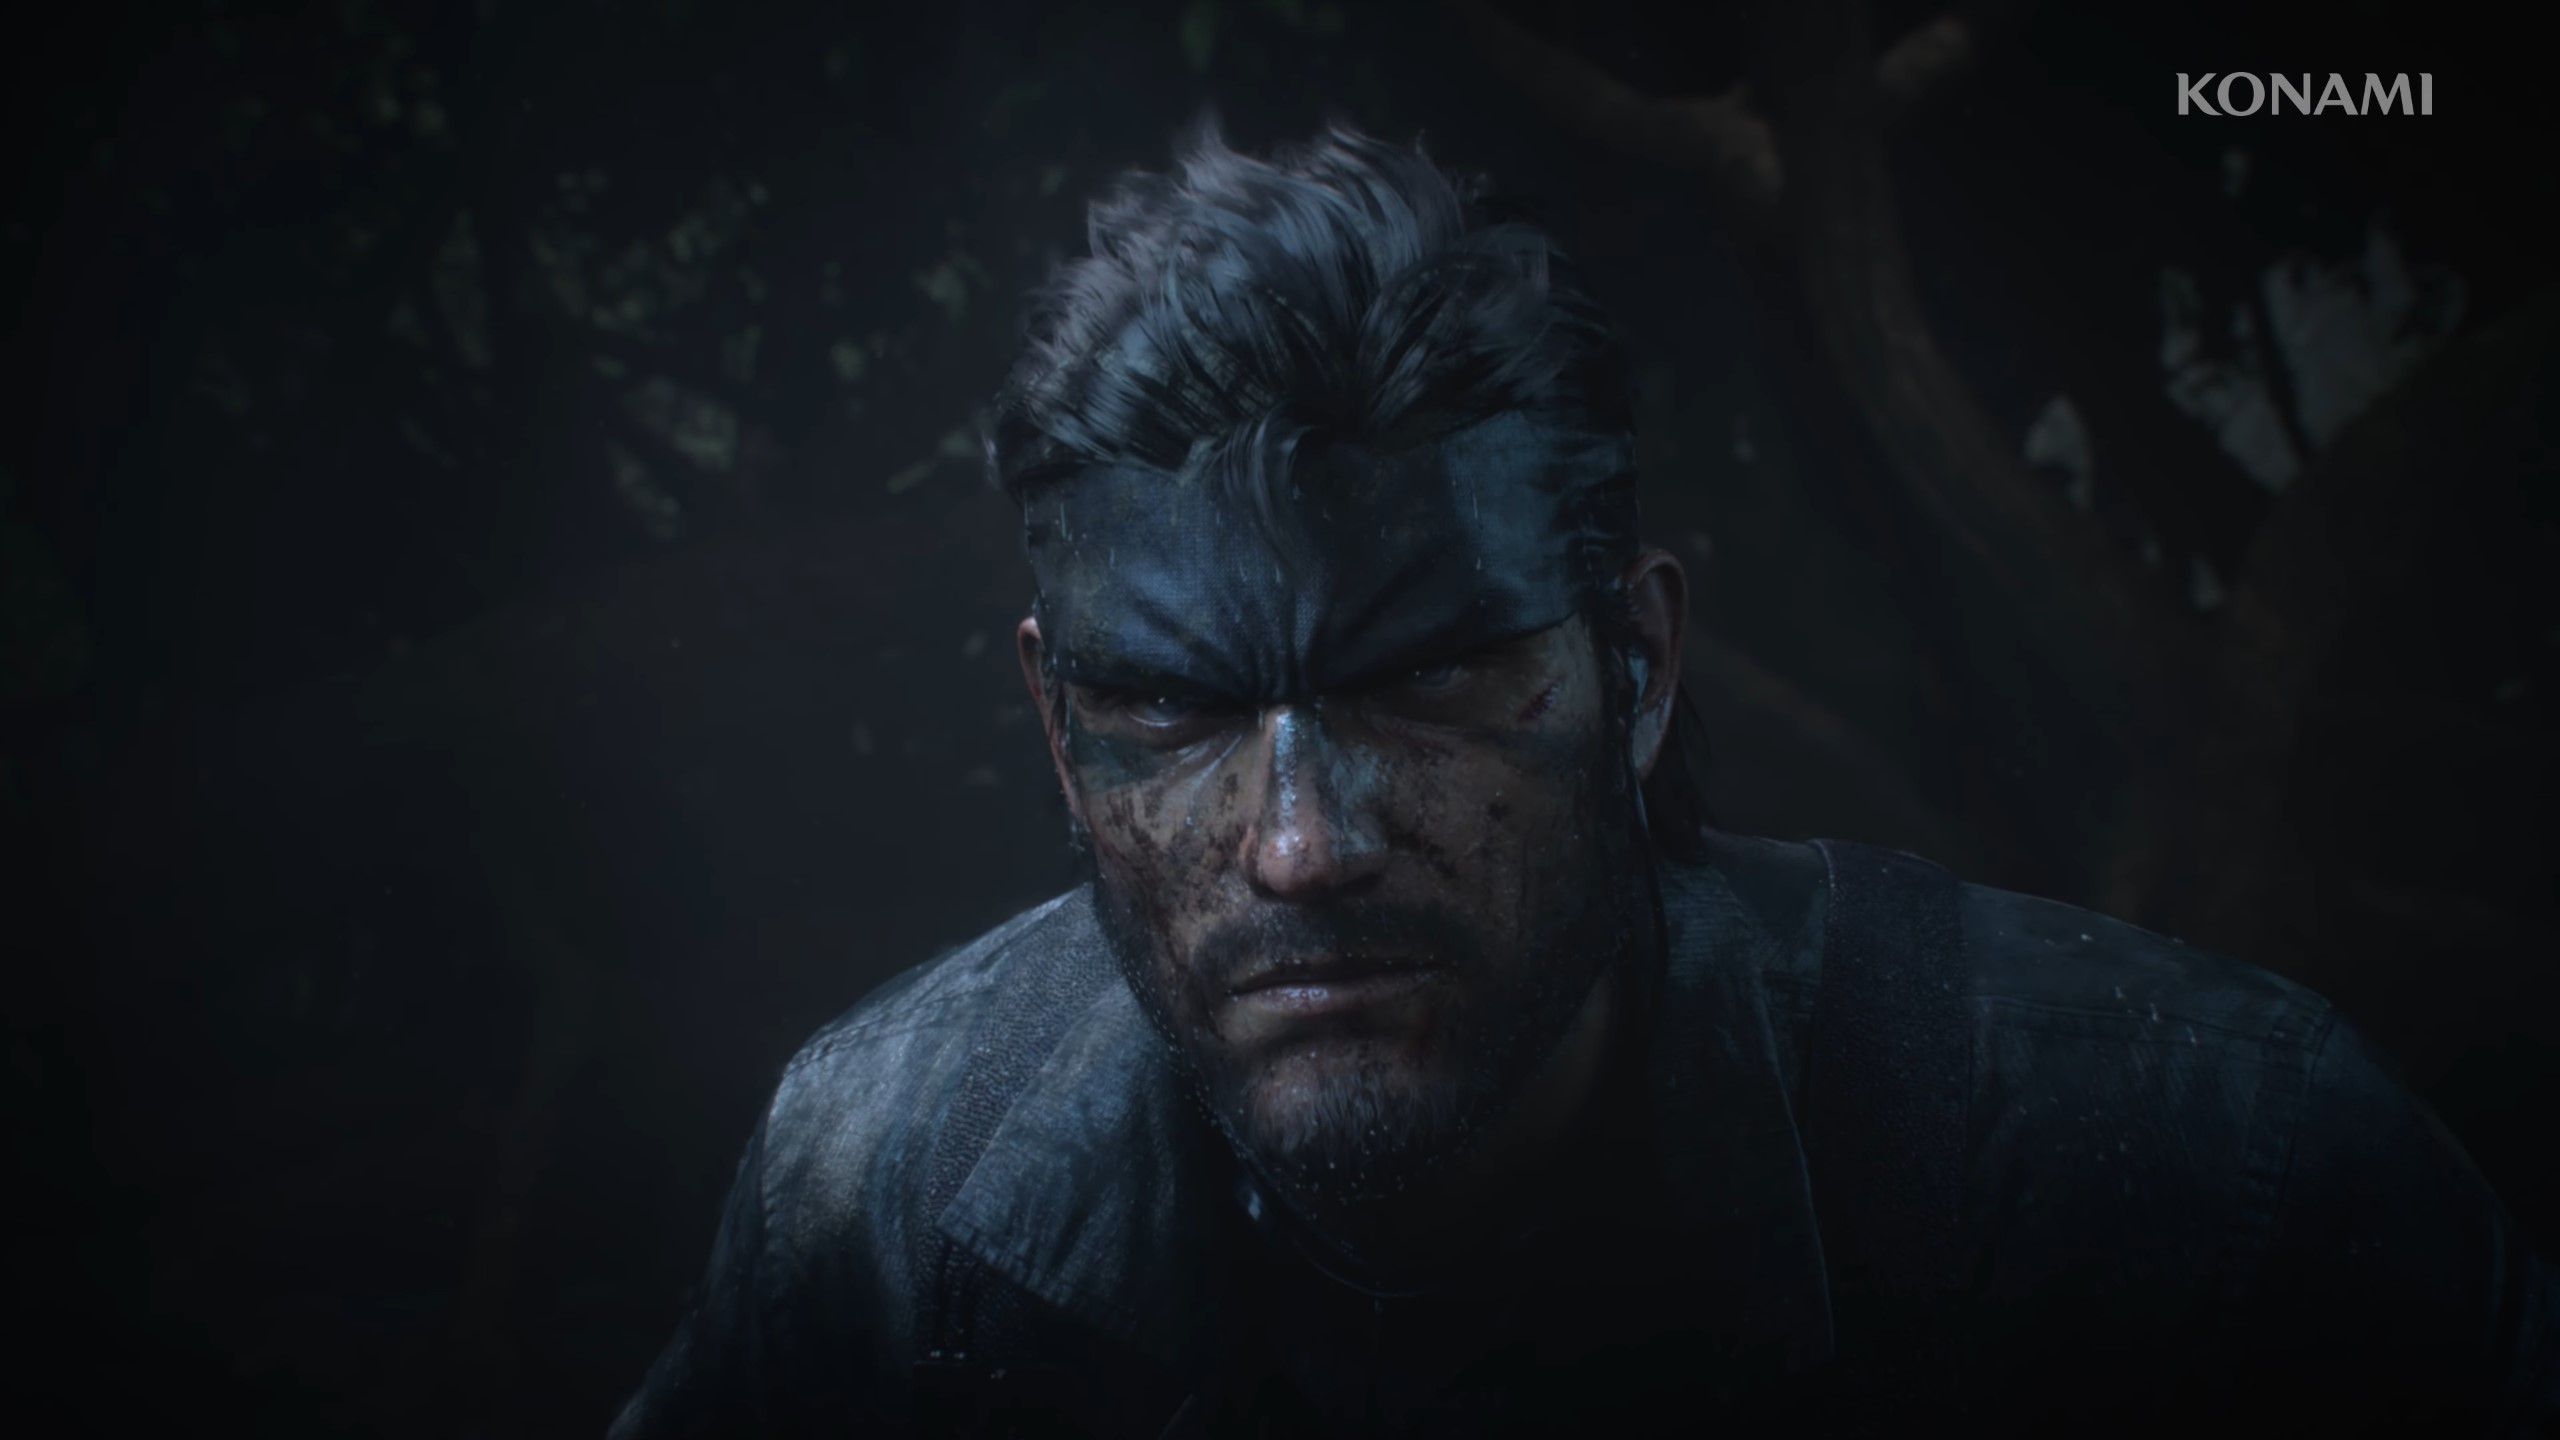 Metal Gear Solid Delta: Snake Eater' Remake Announcement